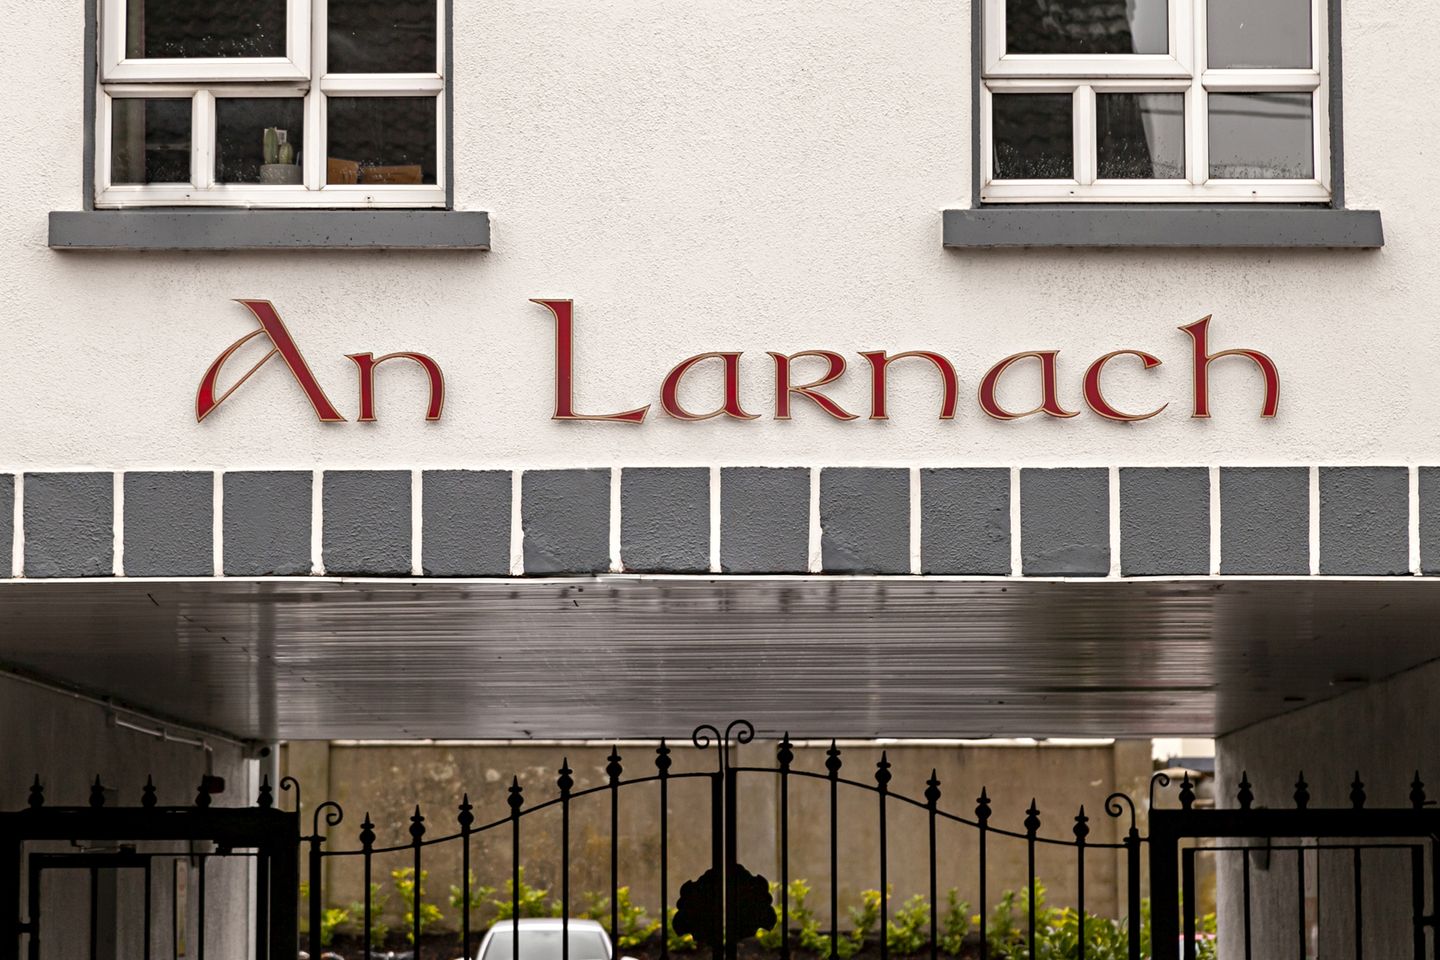 Apartment 25, Larnach, Galway City Centre